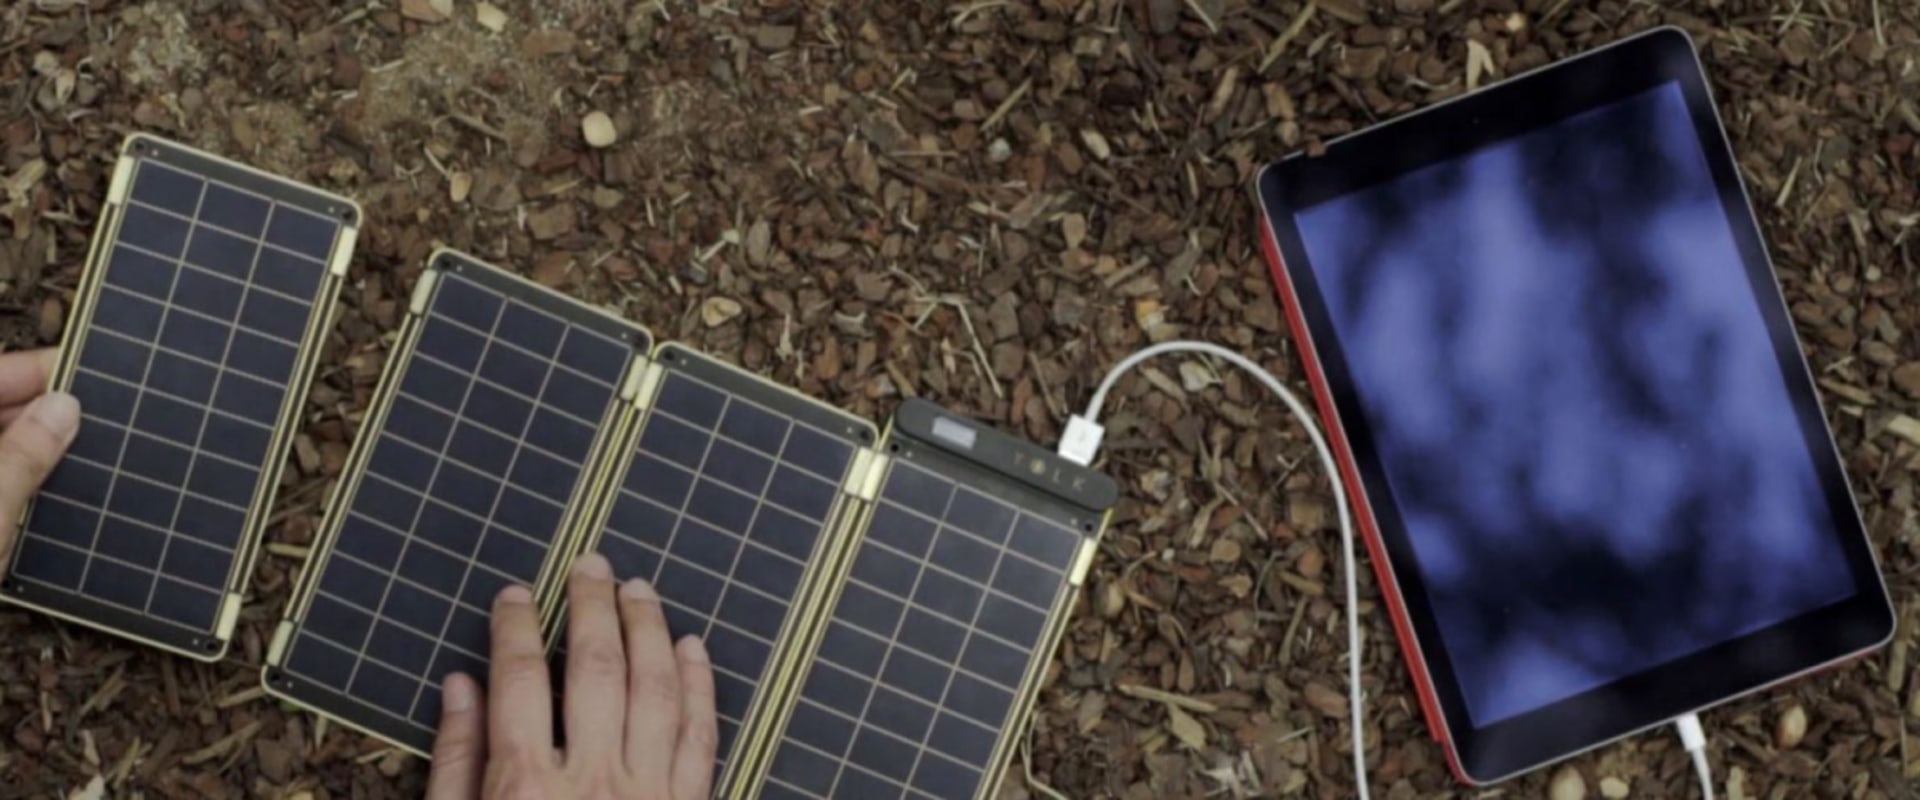 Solar-Powered Phones: What You Need to Know